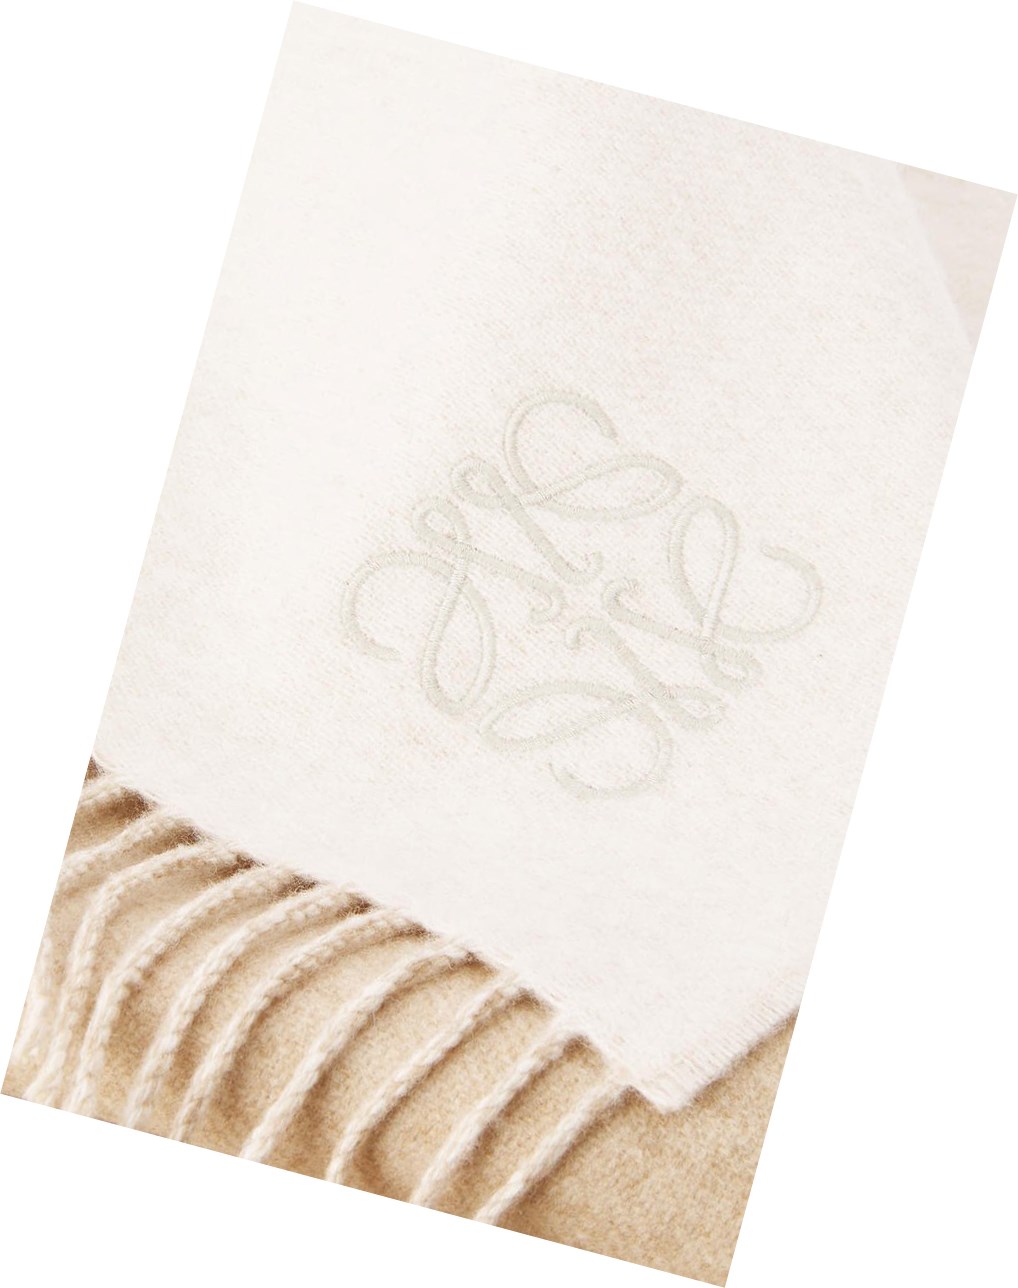 Loewe Bicolour scarf in wool and cashmere Ivory / Sand | EB6892430